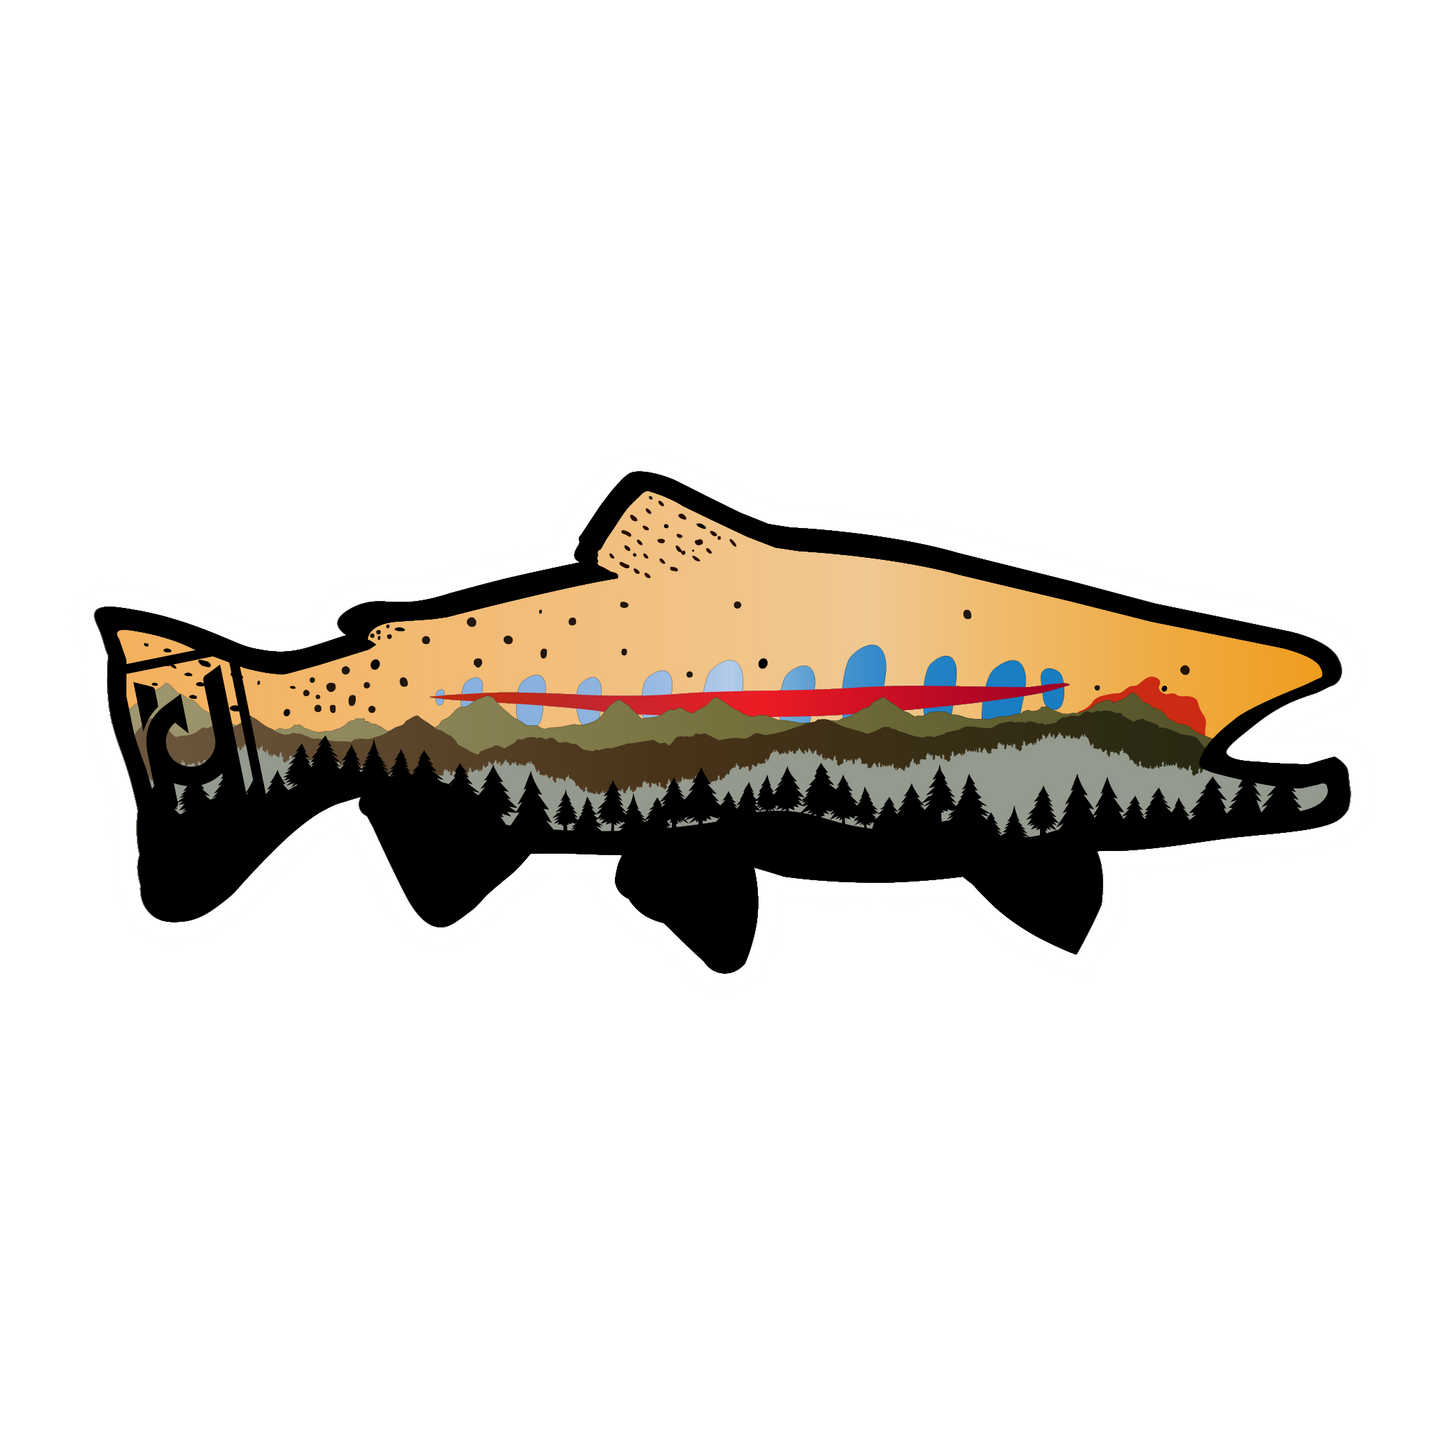 California Golden Trout sticker modeled after our wood art! Includes the beautiful features of the California Golden Trout along with mountain and pine tree accents.